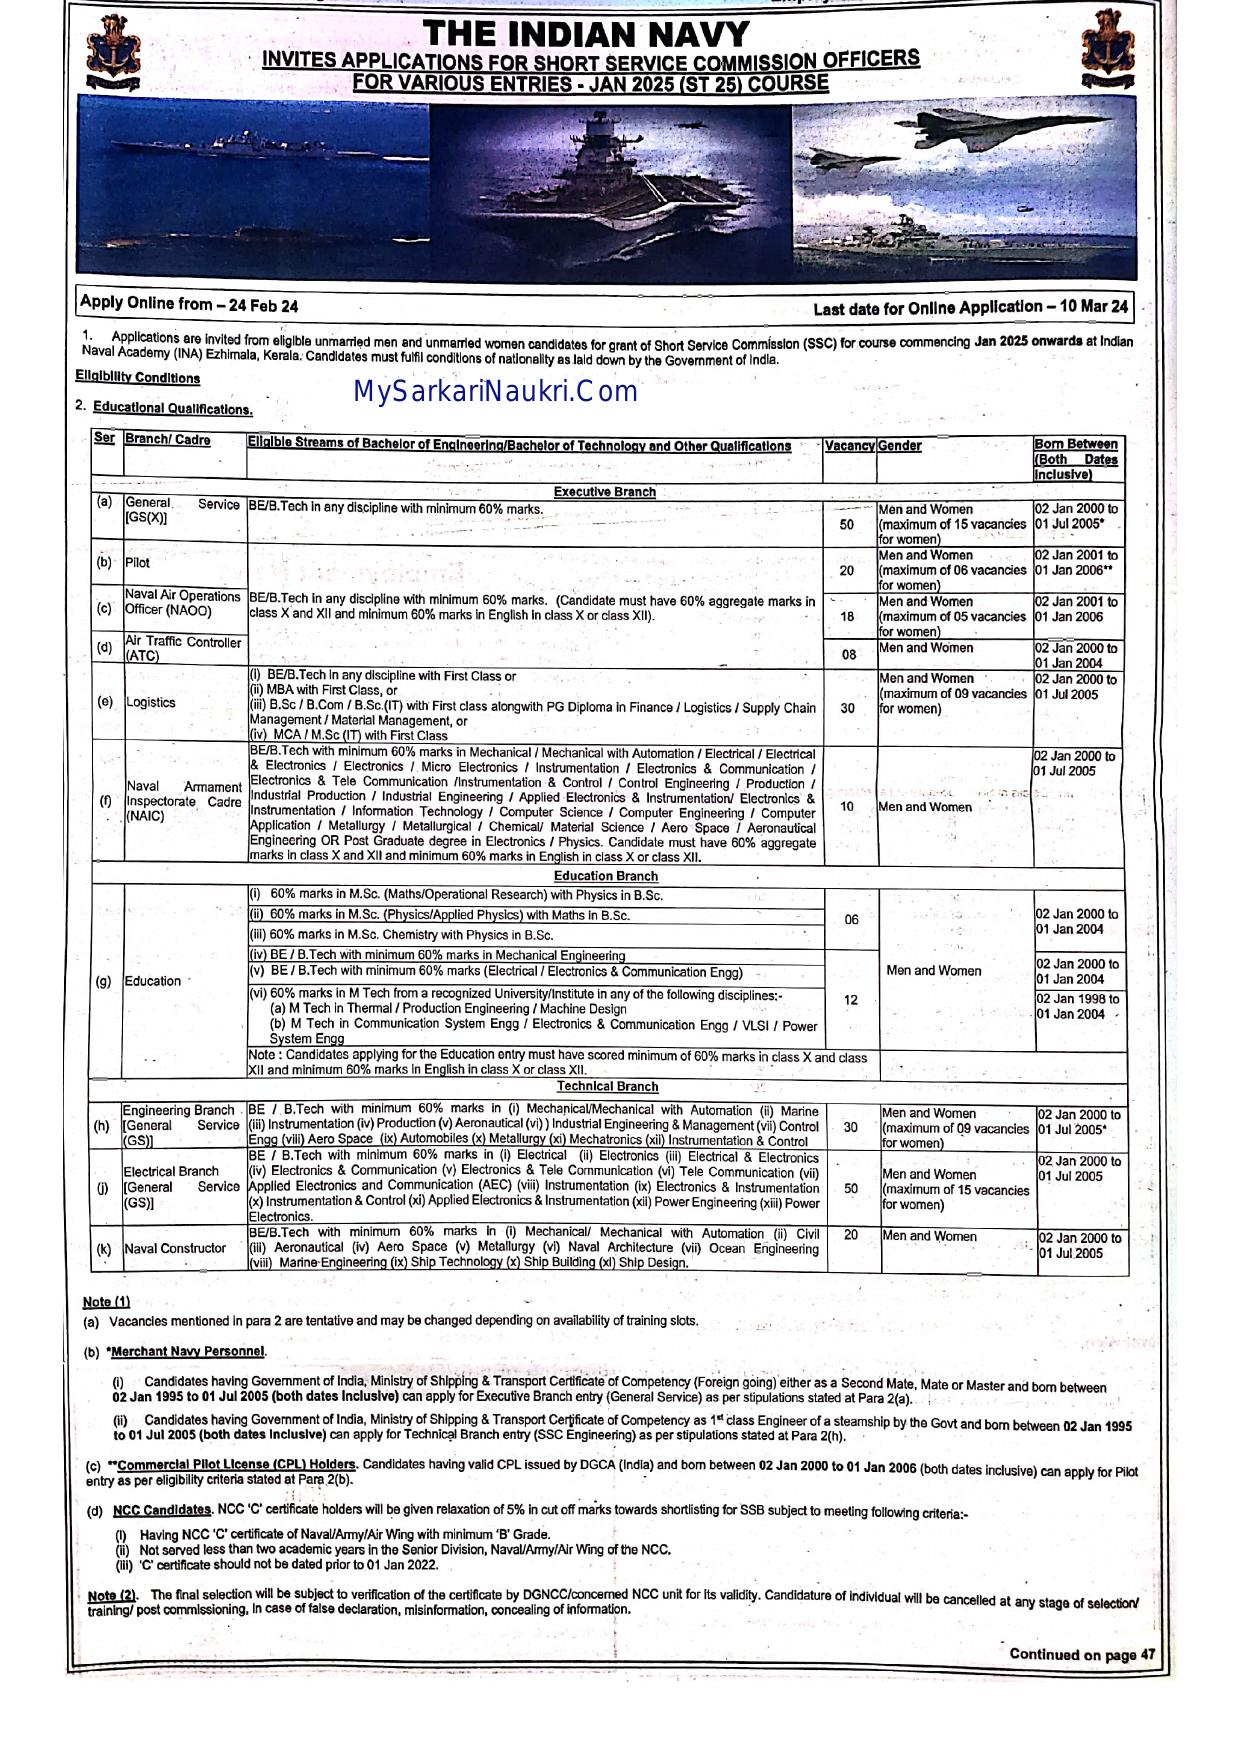 Indian Navy SSC Officer Recruitment - Apply Online for 254 Posts - Page 1